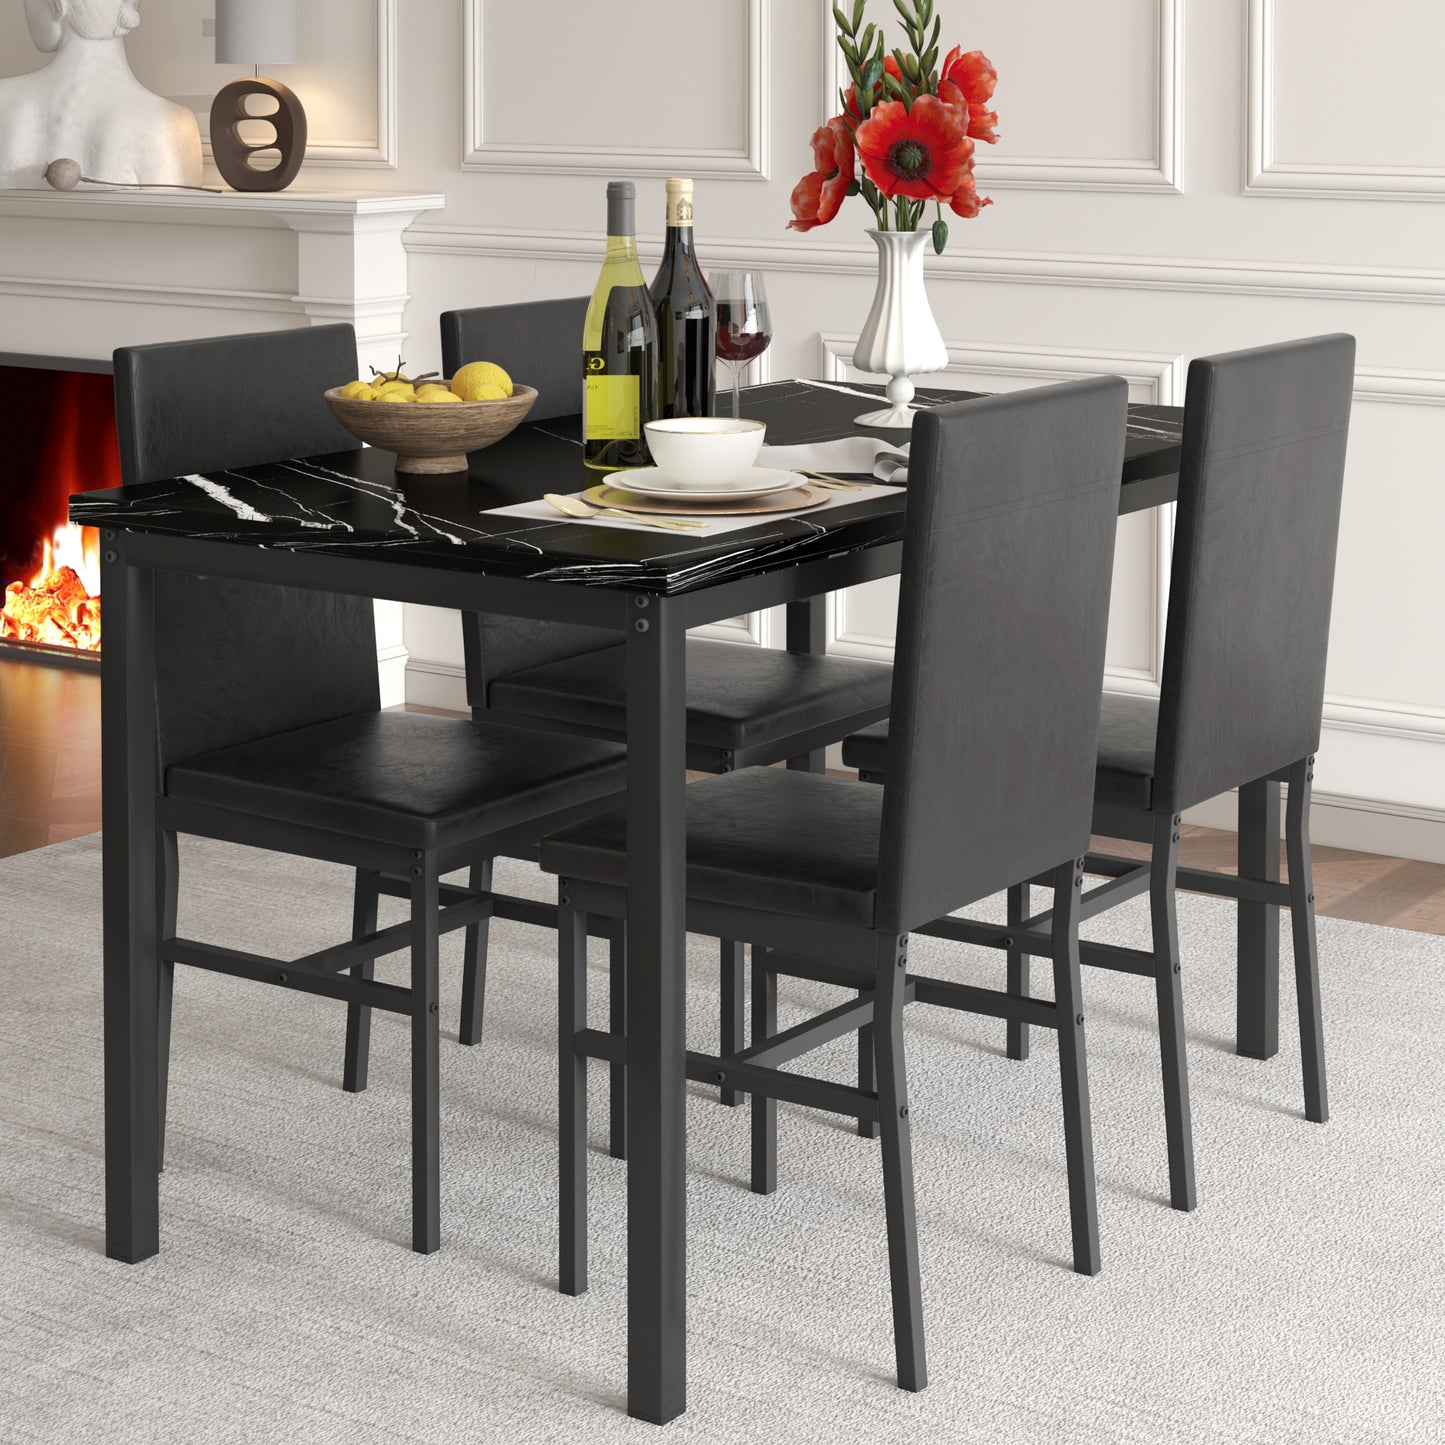 SYNGAR 7 Piece Dining Set, Modern Dining Table and Chairs Set for 6, Kitchen Dining Table Set with Faux Marble Tabletop and 4 PU Leather Upholstered Chairs, for Small Space, Breakfast Nook, D9212